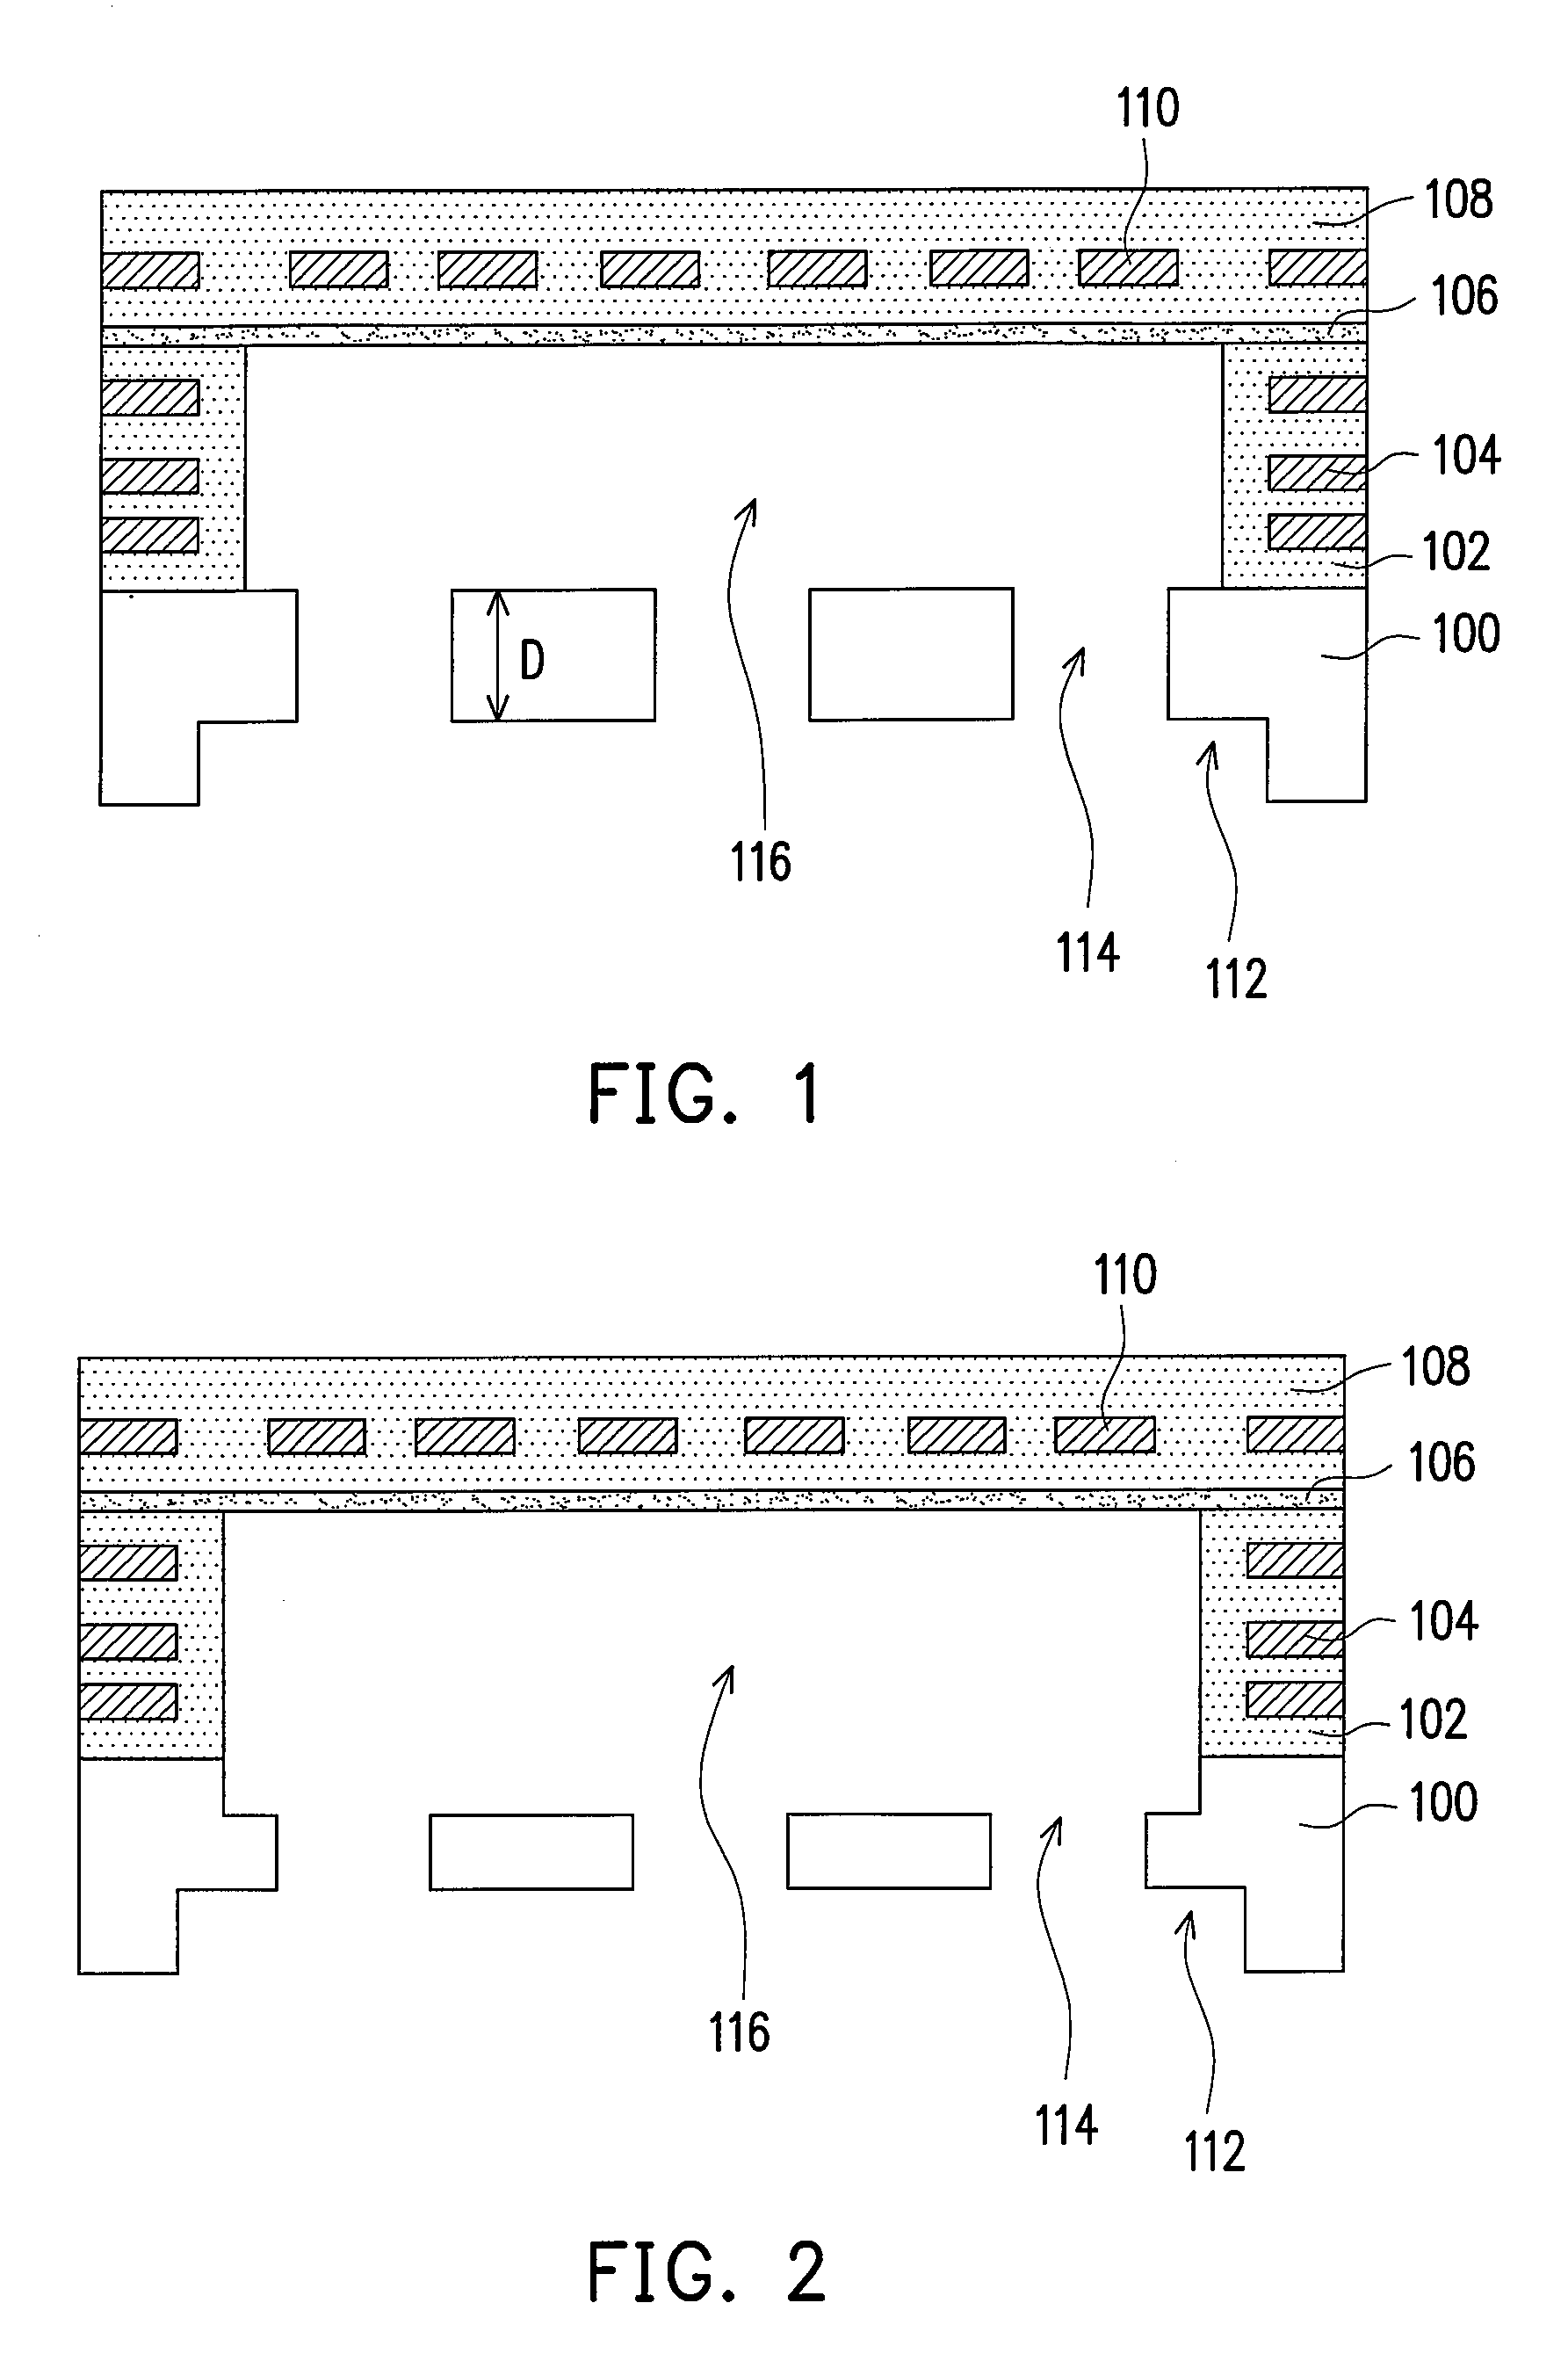 Micro-electro-mechanical systems (MEMS) device and process for fabricating the same